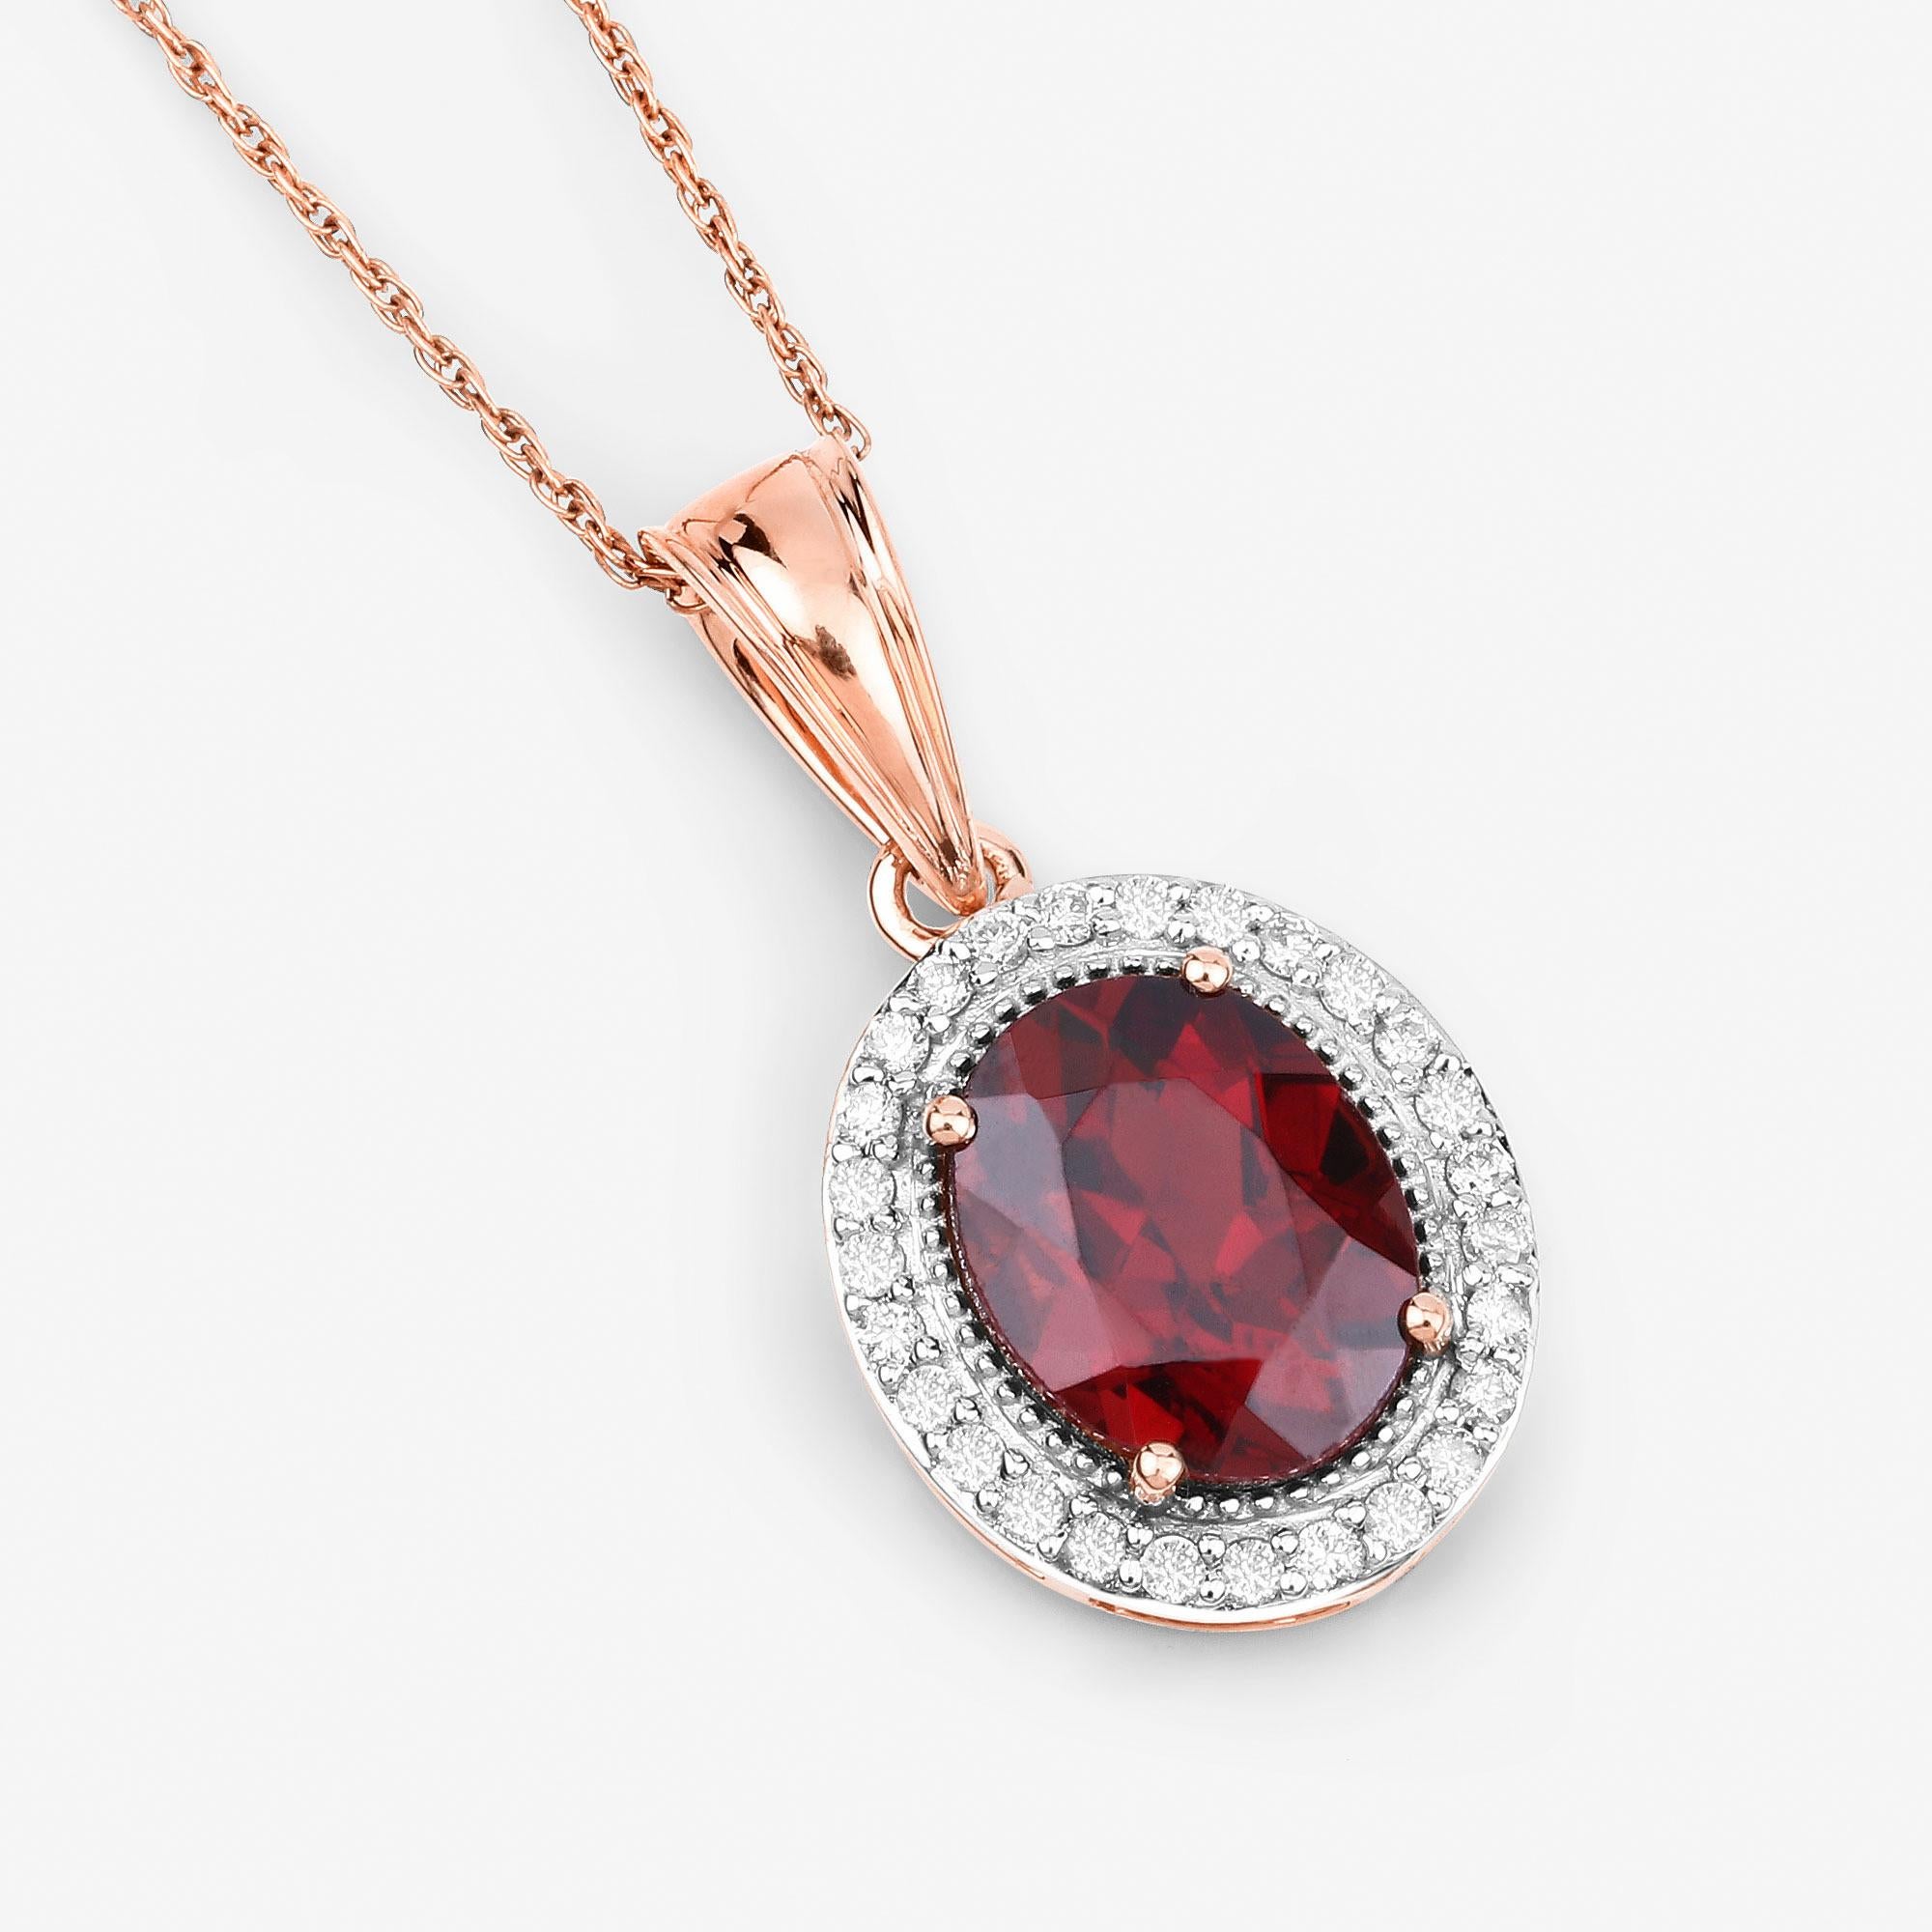 It comes with the appraisal by GIA GG/AJP
Rhodolite Garnet = 2.75 Carat ( 10 x 8 mm )
Cut: Oval
Total Quantity of Garnet: 1
Primary Stone Color: Red
Diamonds = 0.25 Carats
Total Quantity of Diamonds: 27
Metal: 14K Rose Gold
Dimensions: 24.5 x 13 x 5